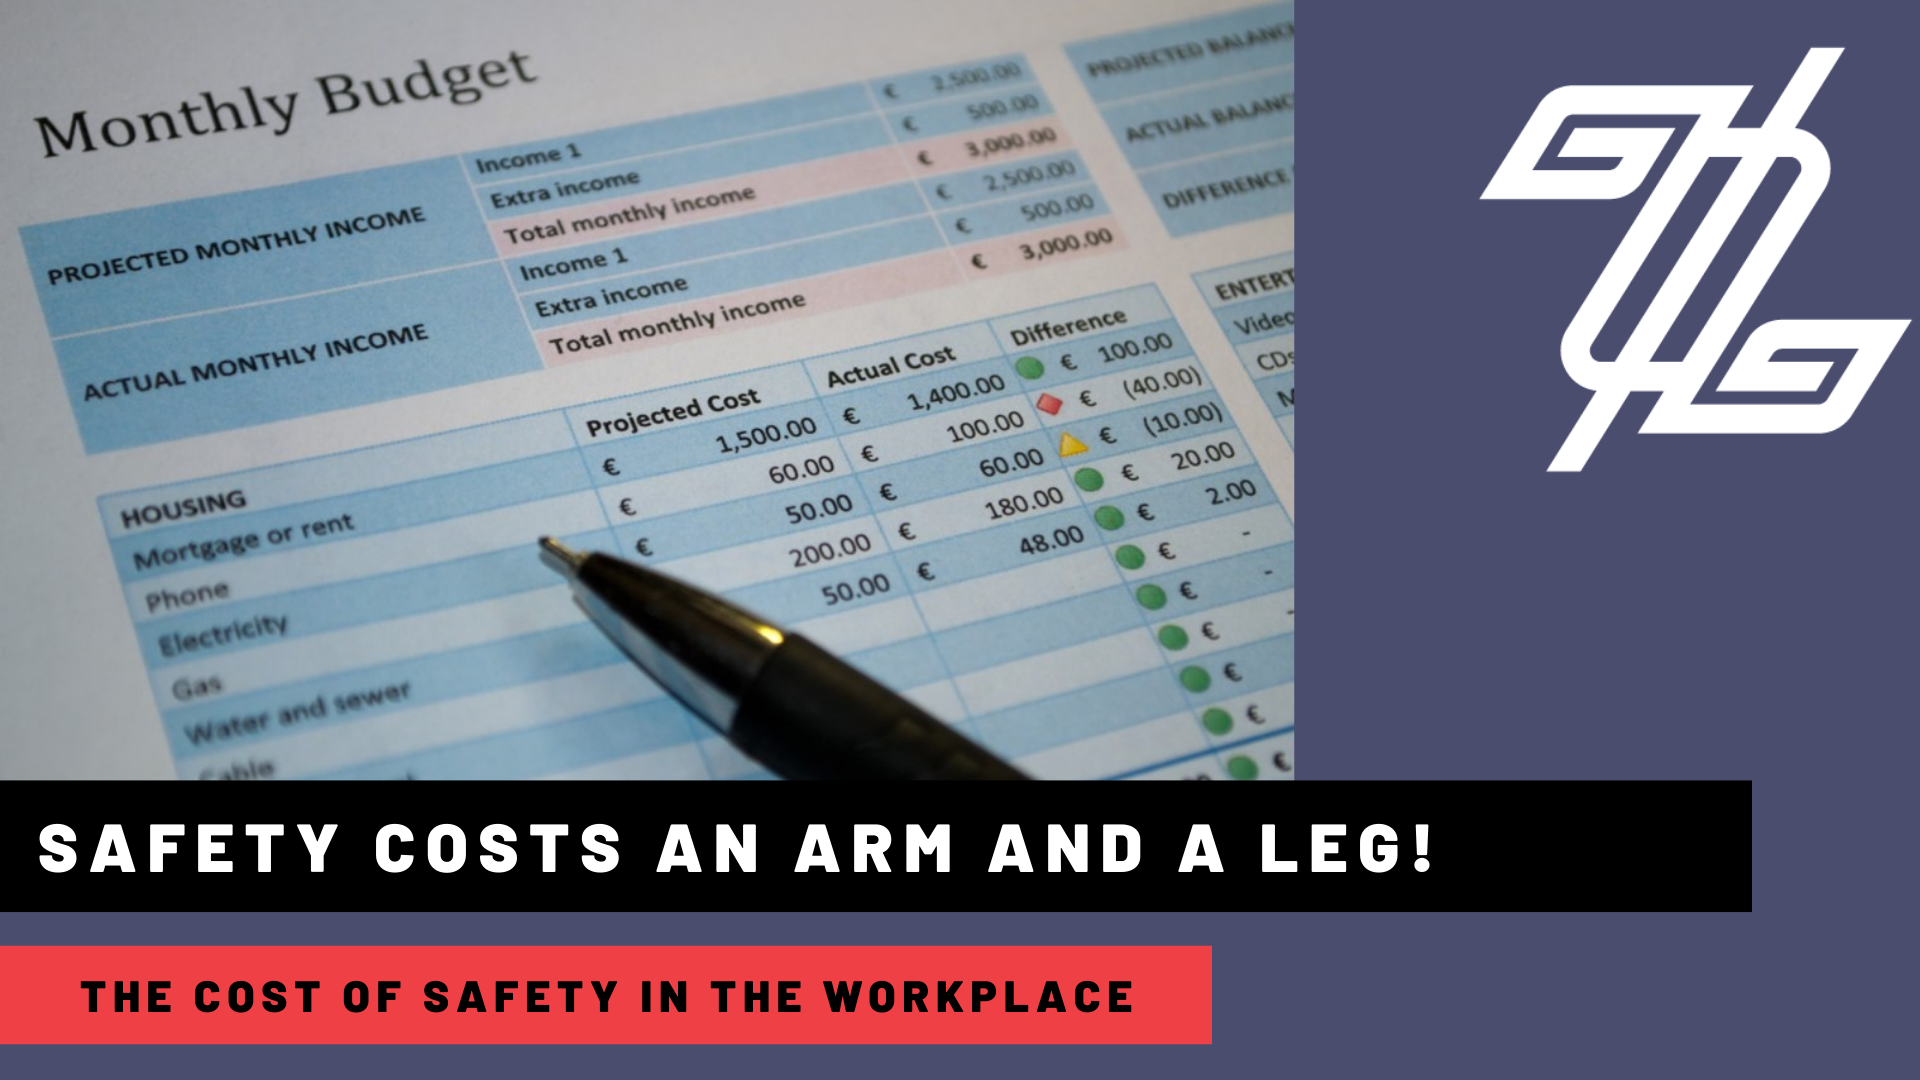 Safety costs an arm and a leg!